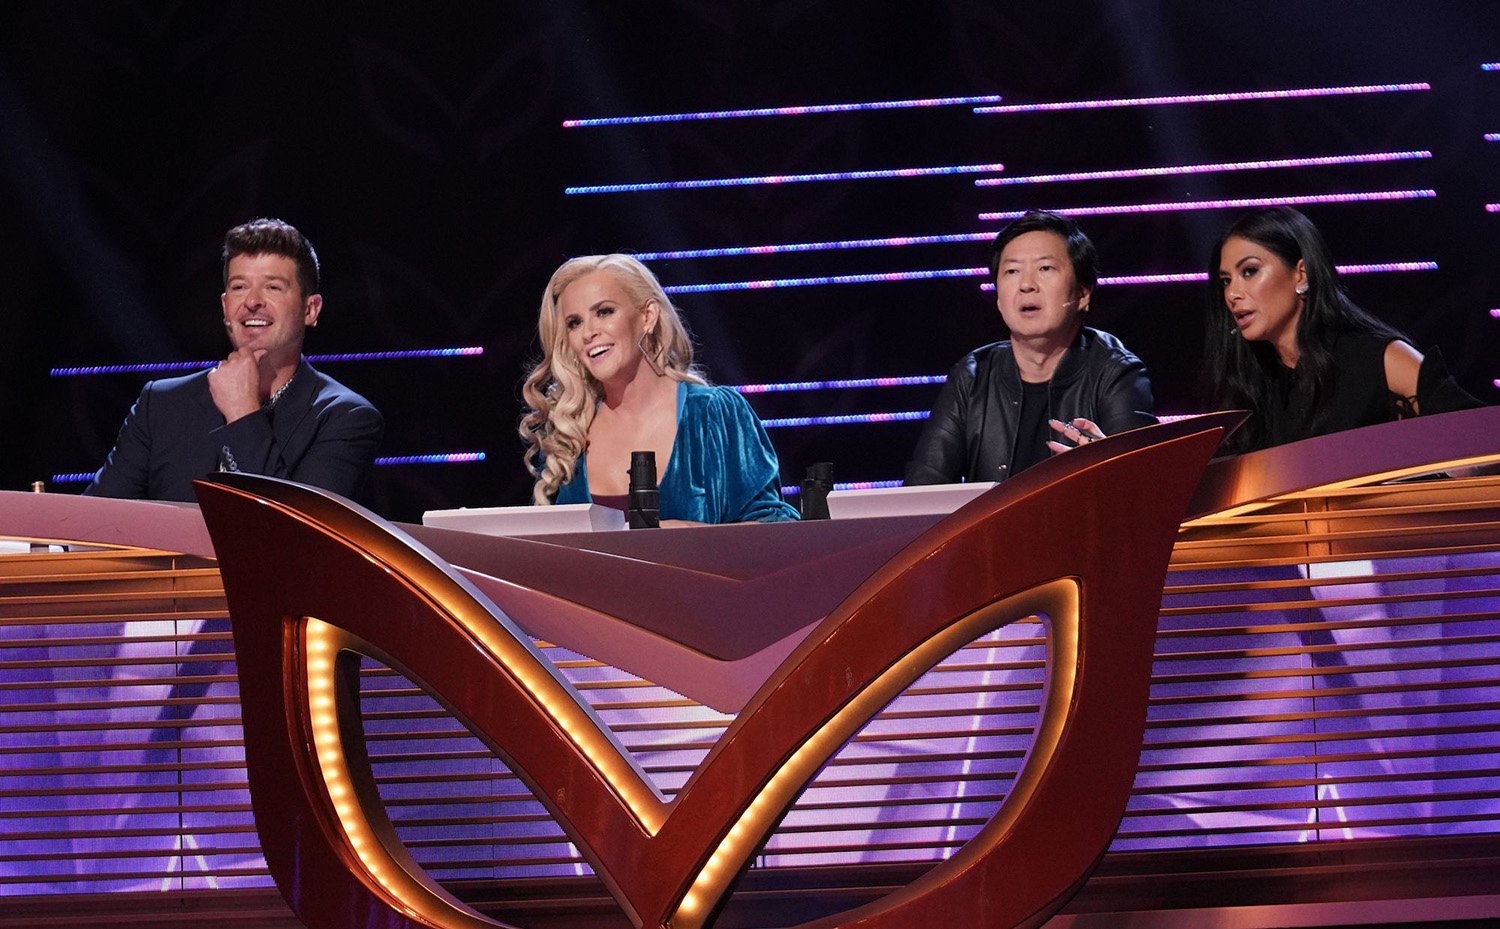 The Masked Singer judges Robin Thicke, Jenny McCarthy Wahlberg, Ken Jeong, and Nicole Scherzinger have shared some of the worst guesses at the panelists' table.